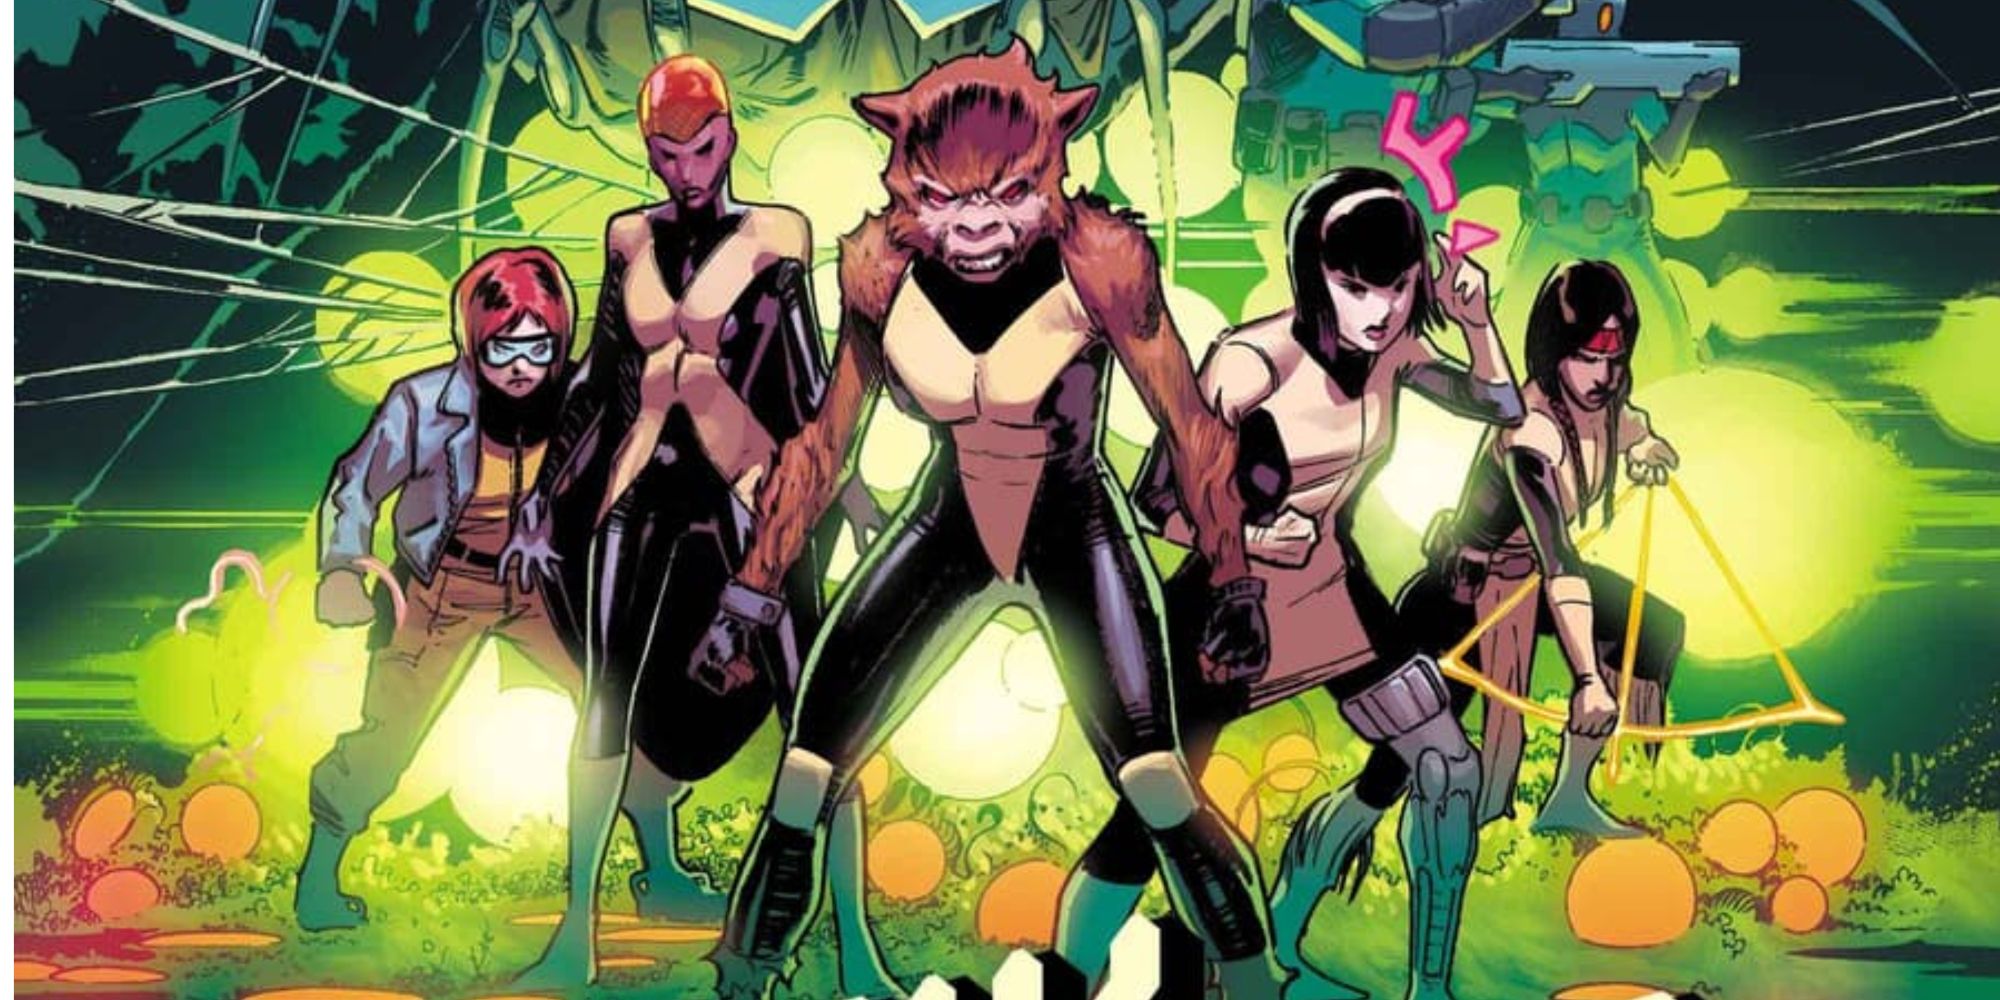 The cover to Marvel Comics' New Mutants: Lethal Legion #1 featuring Escapade, Cerebella, Wolfsbane, Karma, and Mirage